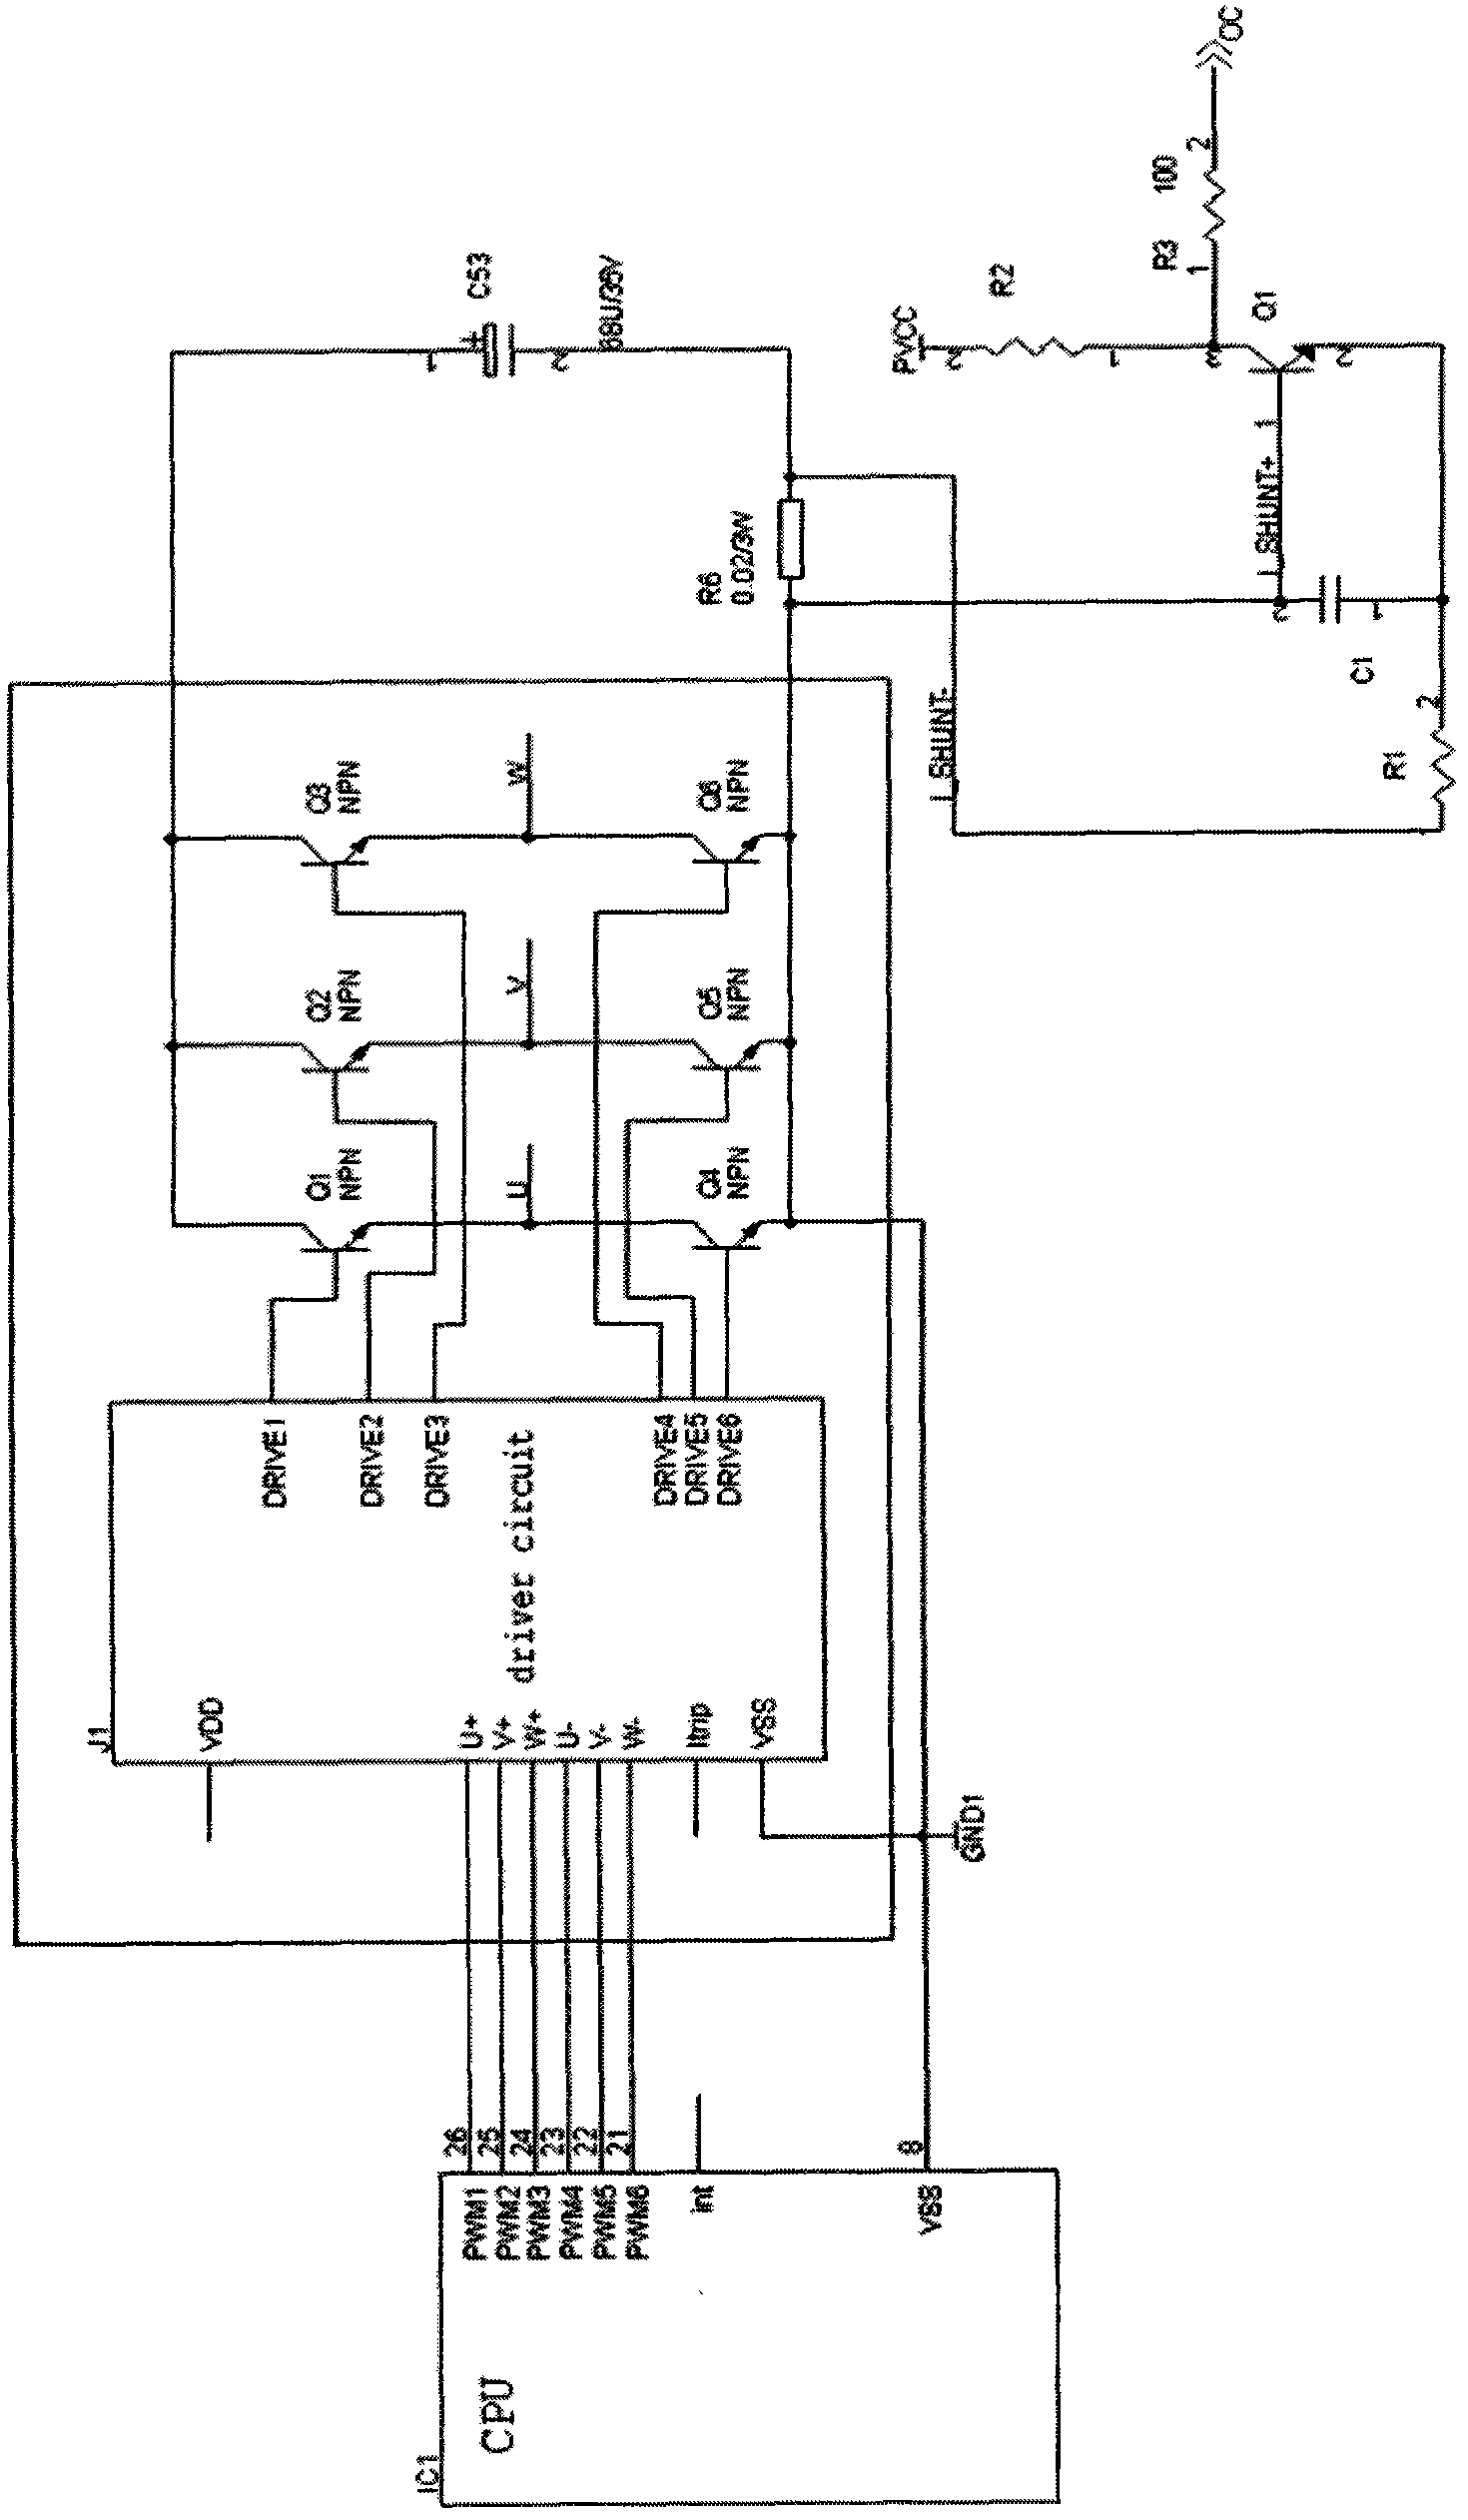 Over-current or short-circuit state detection circuit of insulated gate bipolar transistor (IGBT)